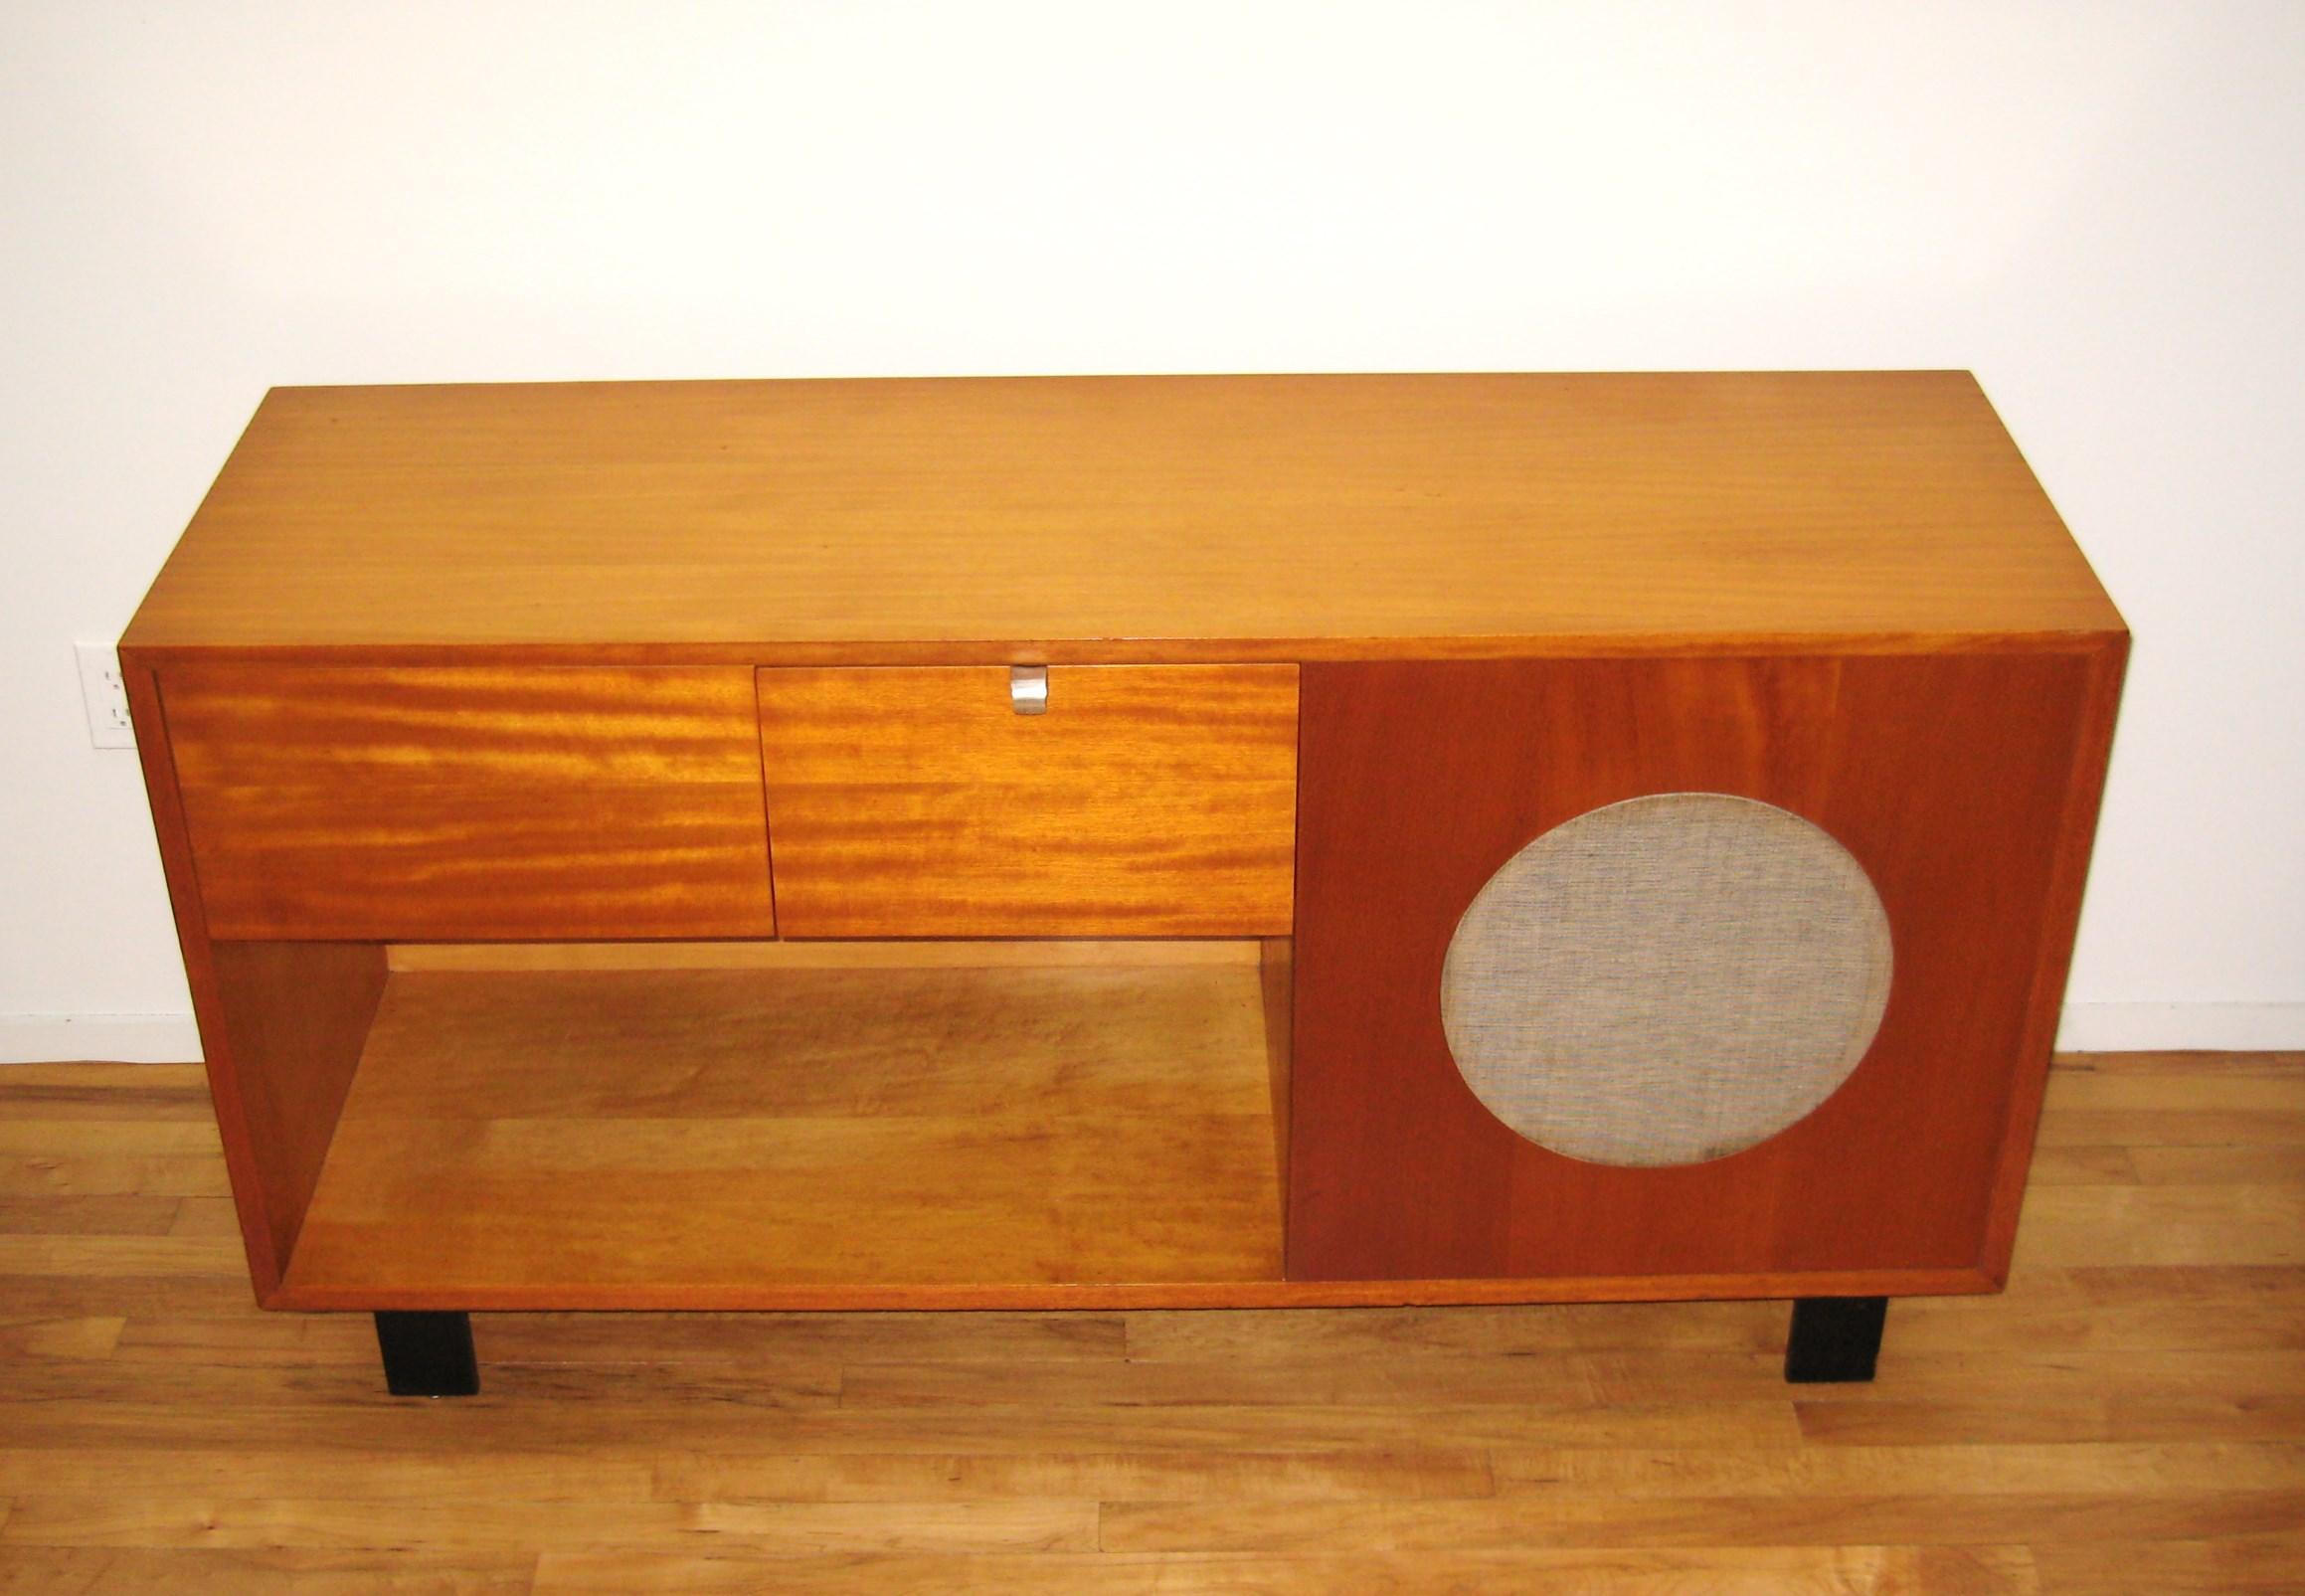 Mid-Century Modern cabinet console designed by George Nelson manufactured by Herman Miller features original turntable with Original Meissner tube radio amplifier. Looks intact, the equipment will need restoration. This will be a wonderful addition